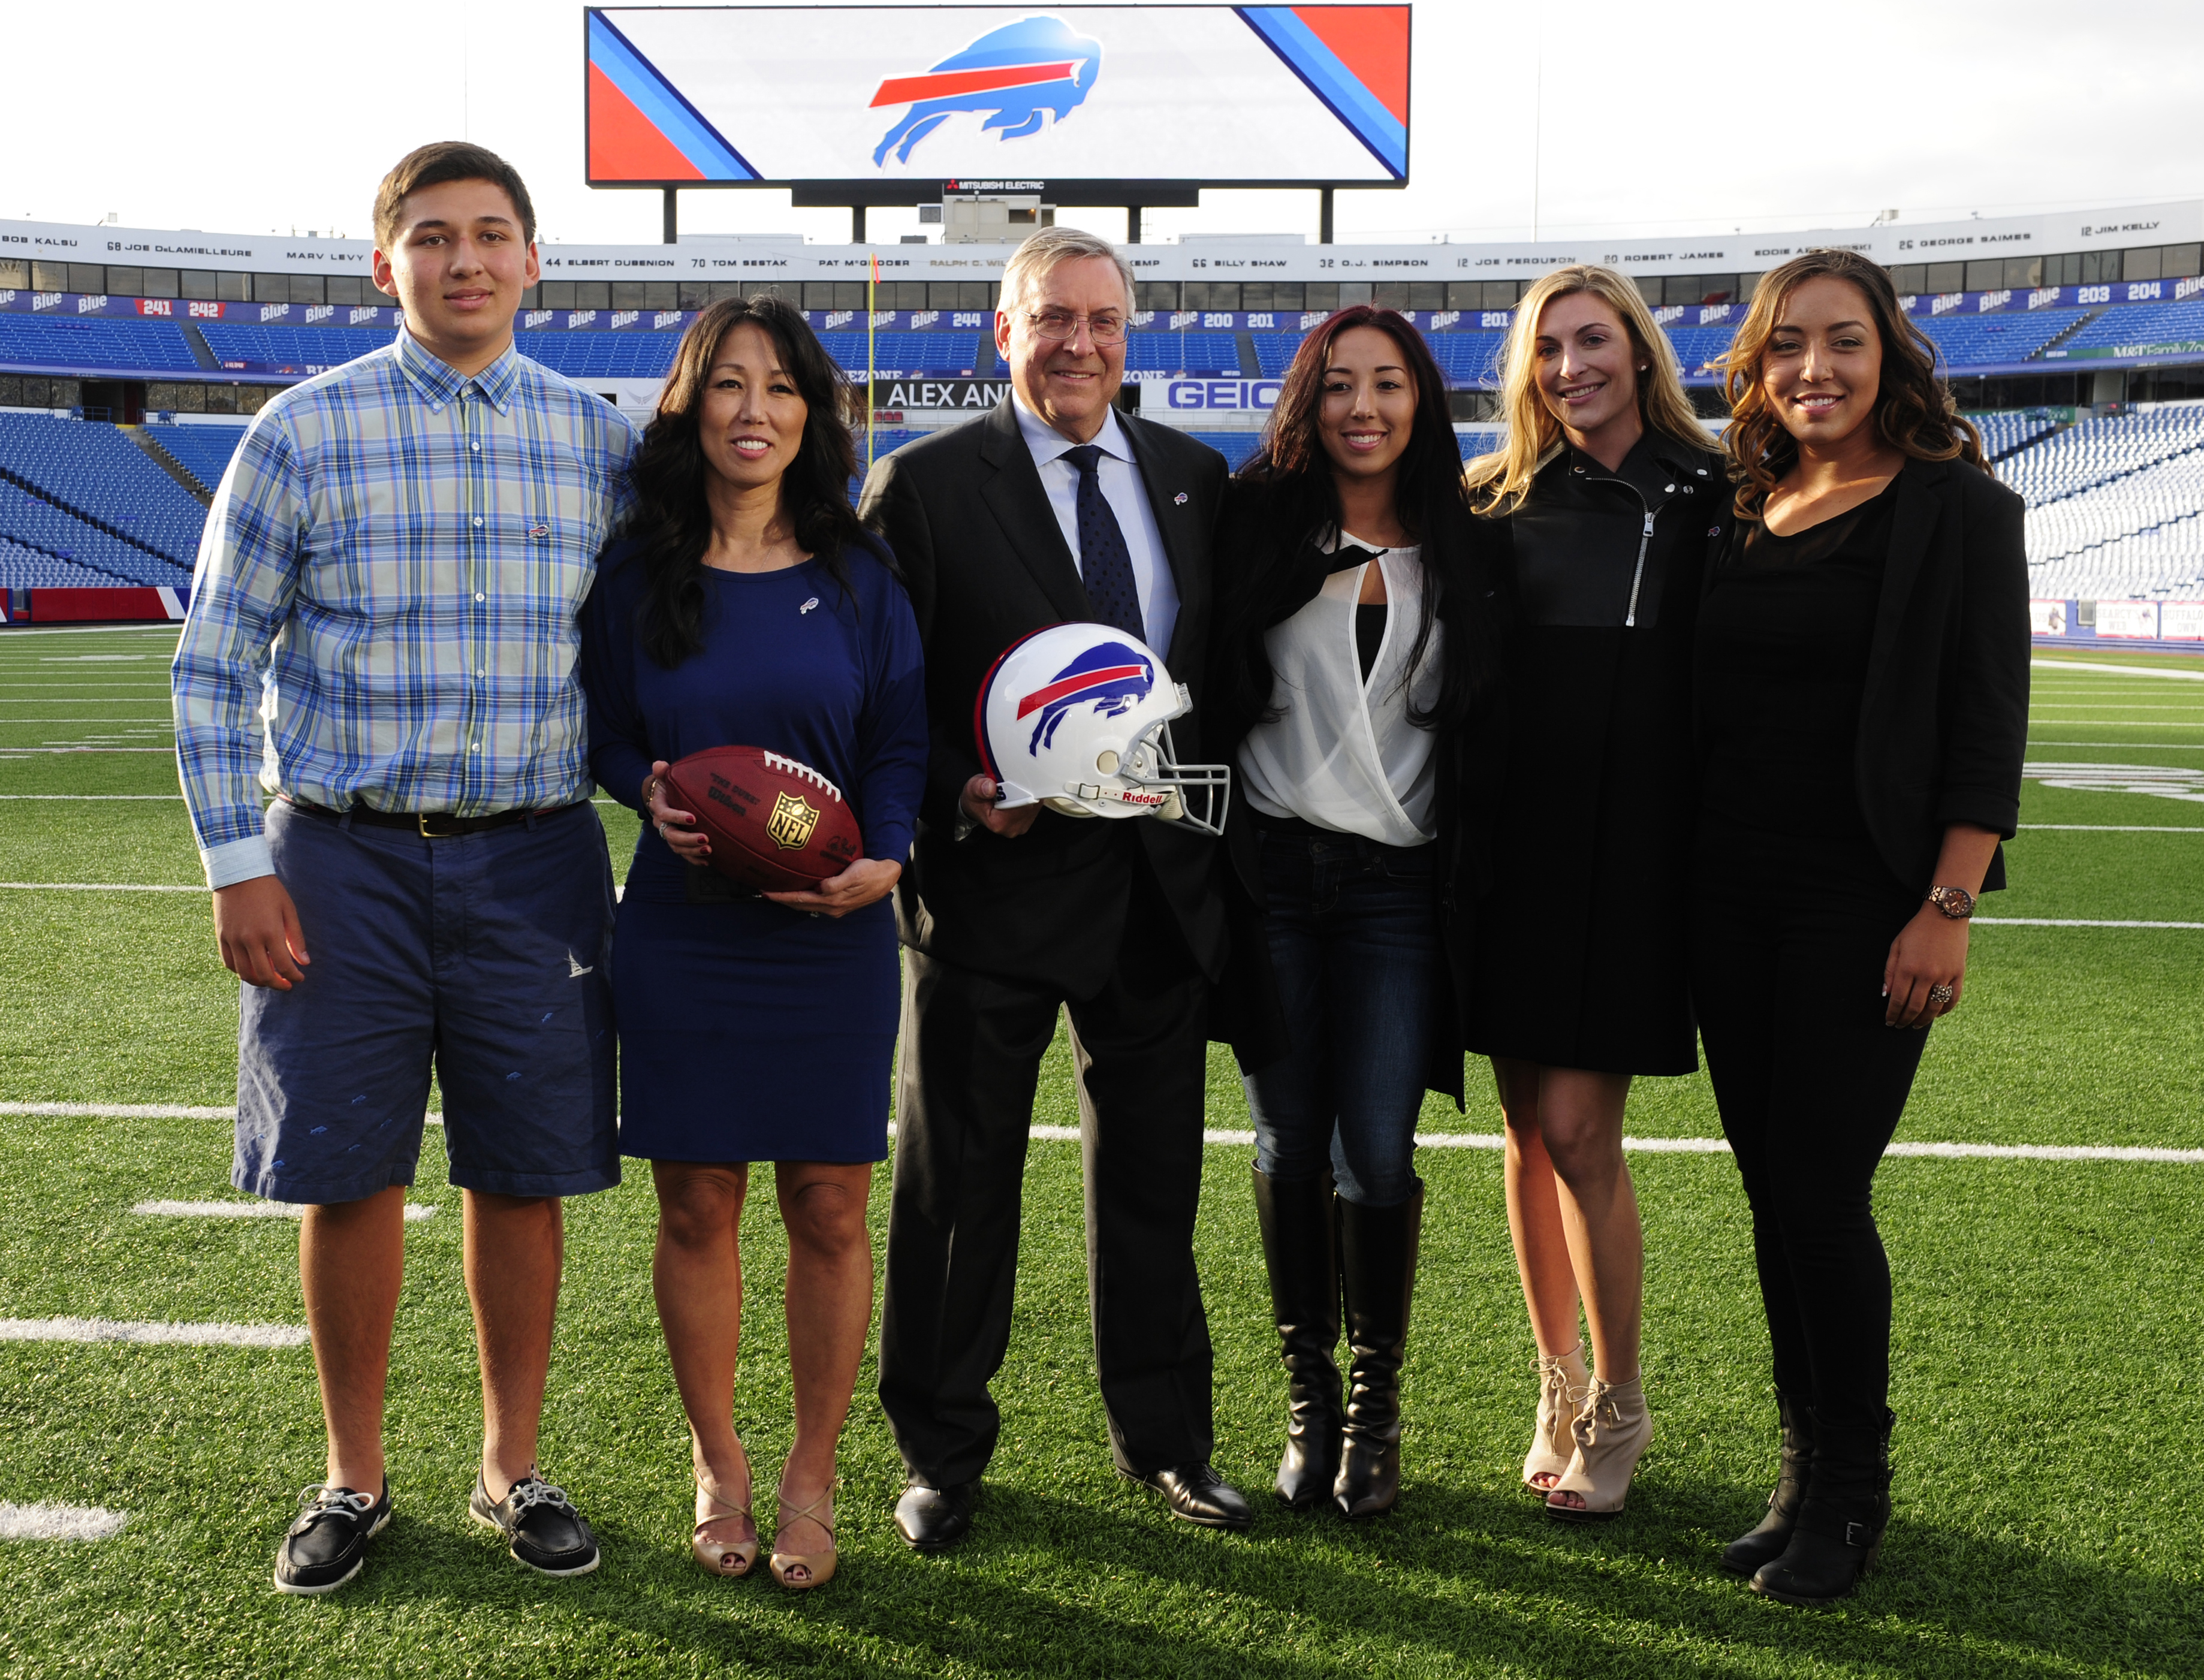 , Jessica Pegula is world’s richest tennis star, heiress to $4bn whose dad Terry outbid Trump to buy the Buffalo Bills